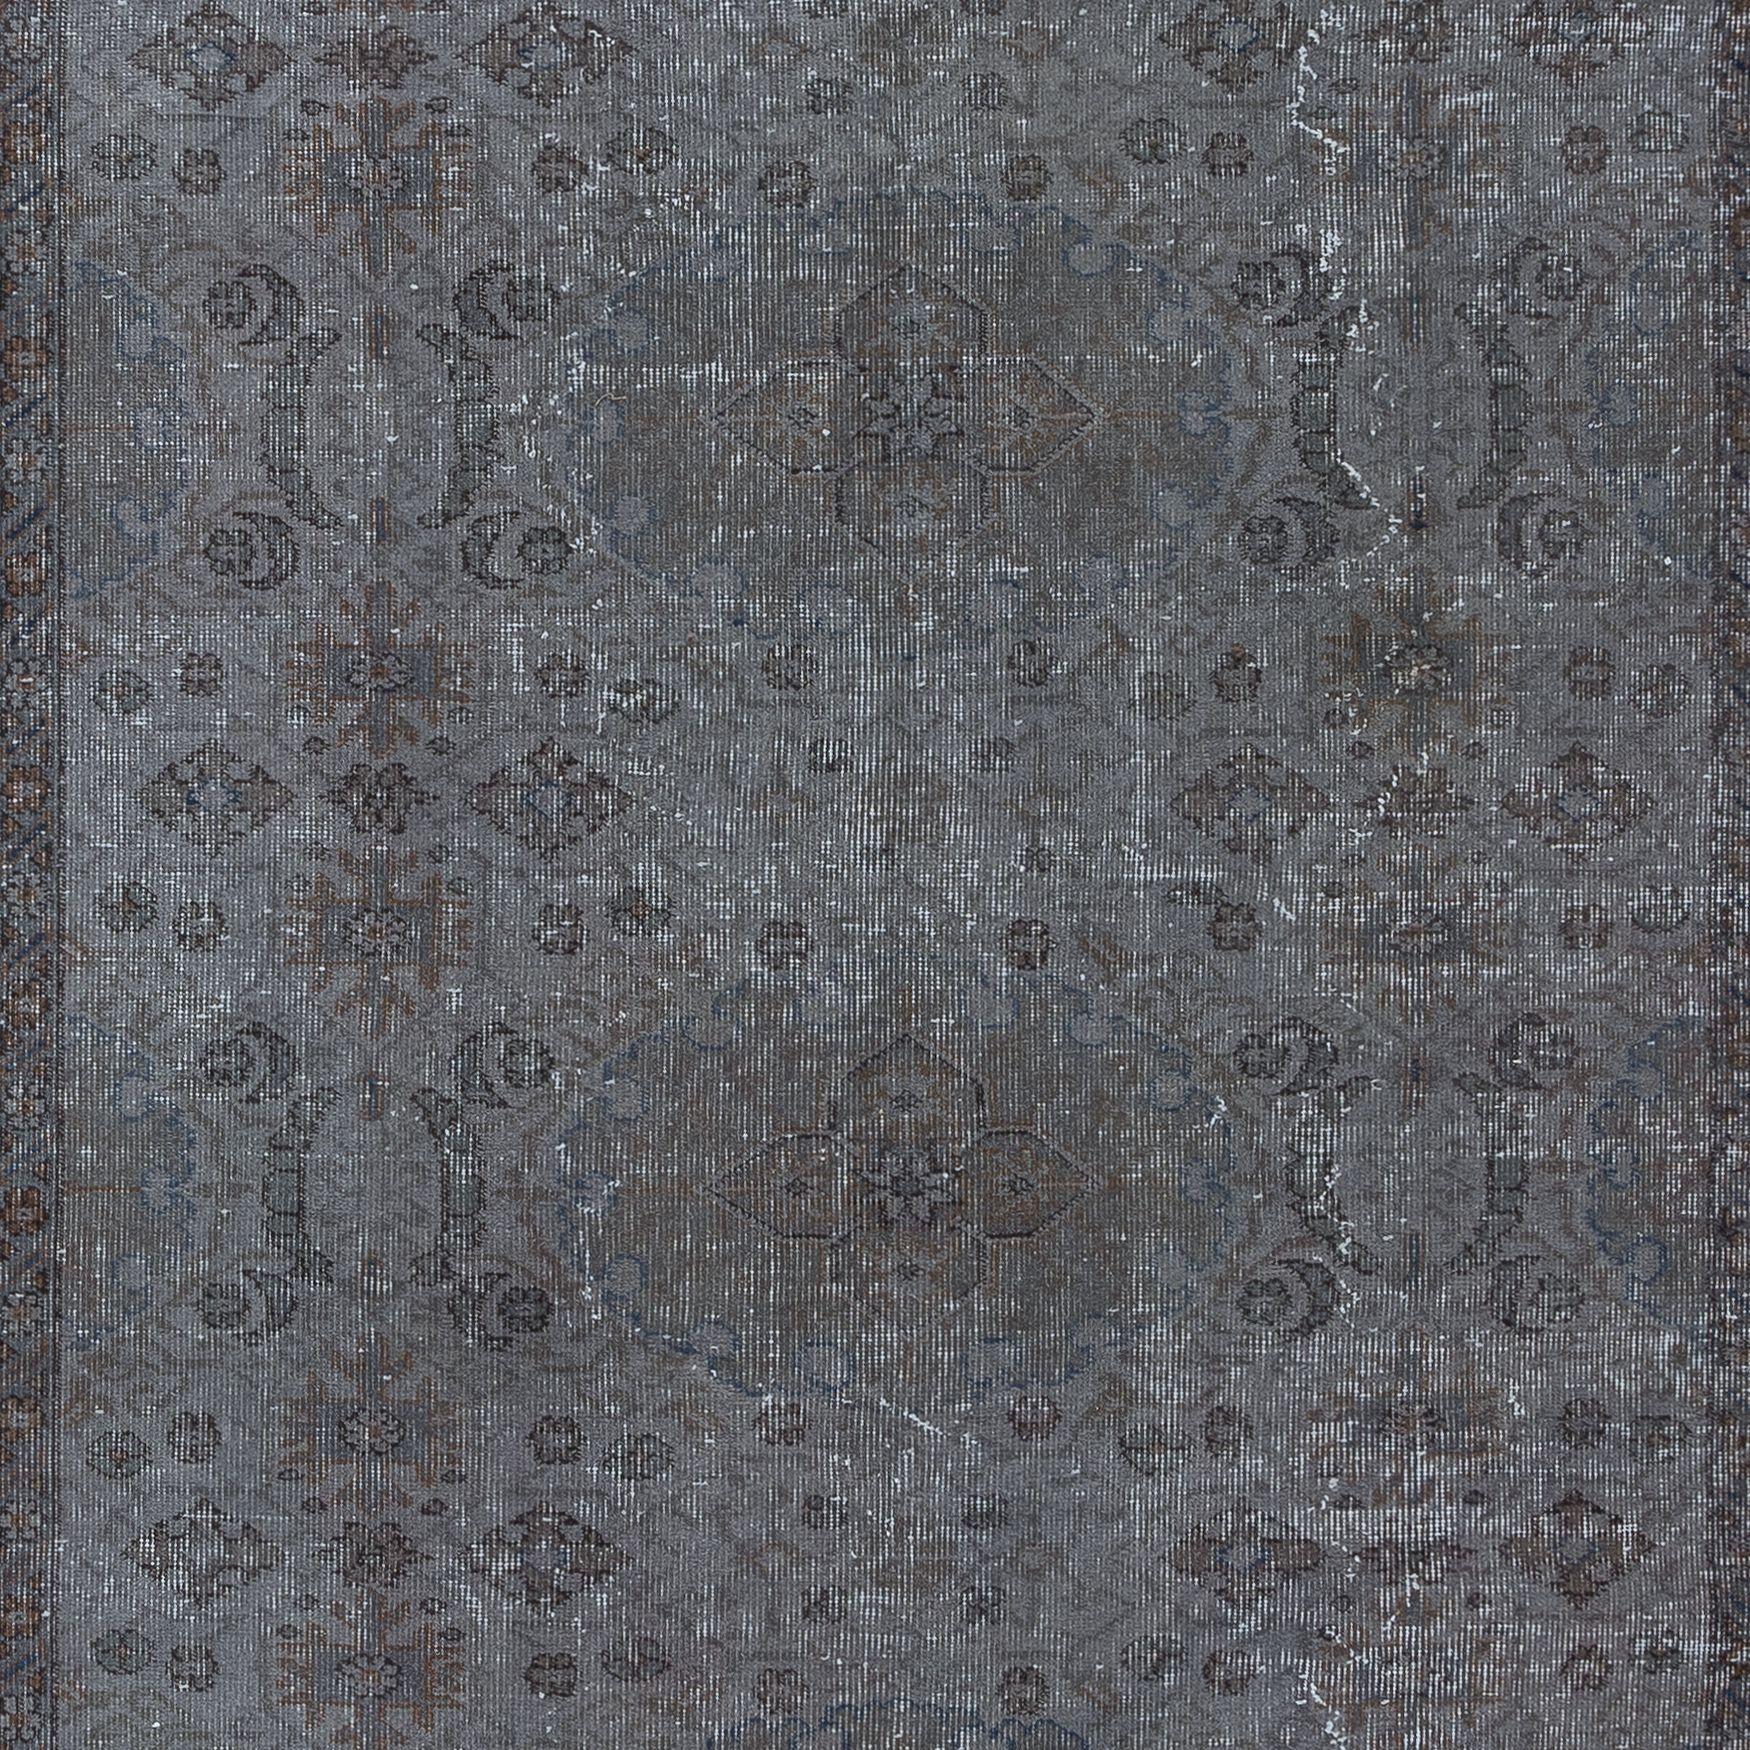 5.6x8.7 Ft Traditional Handmade Rug in Iron Gray Color, Modern Home Decor Carpet In Good Condition For Sale In Philadelphia, PA